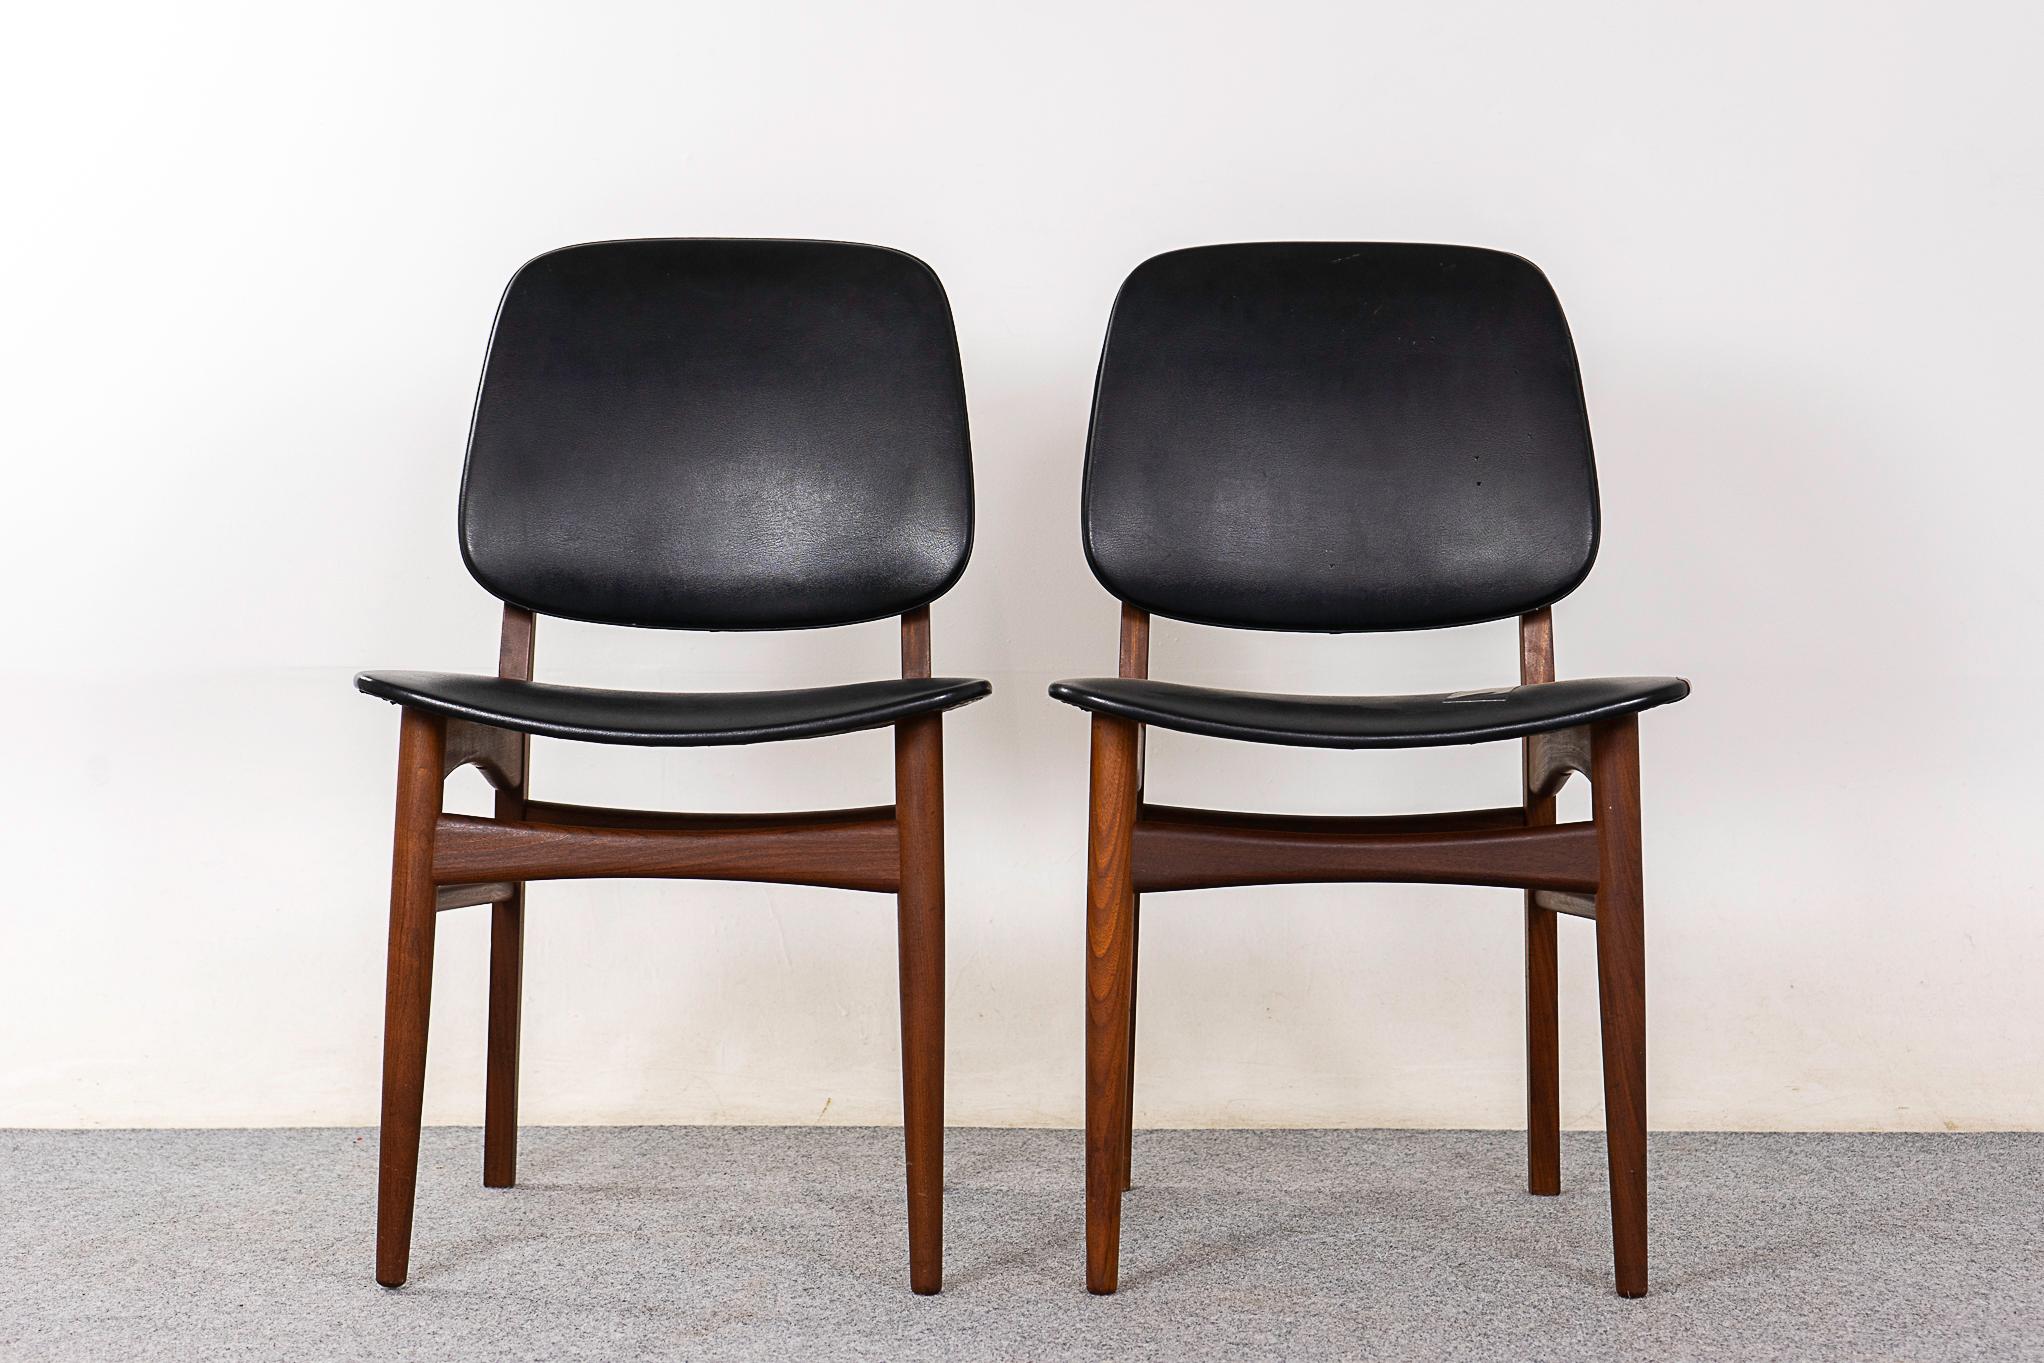 Teak Danish dining chair pair, circa 1960's. Elegant rich toned solid wood frames with bowtie cross supports and floating seats. Original jet black vinyl with wear/patch on 1 seat.